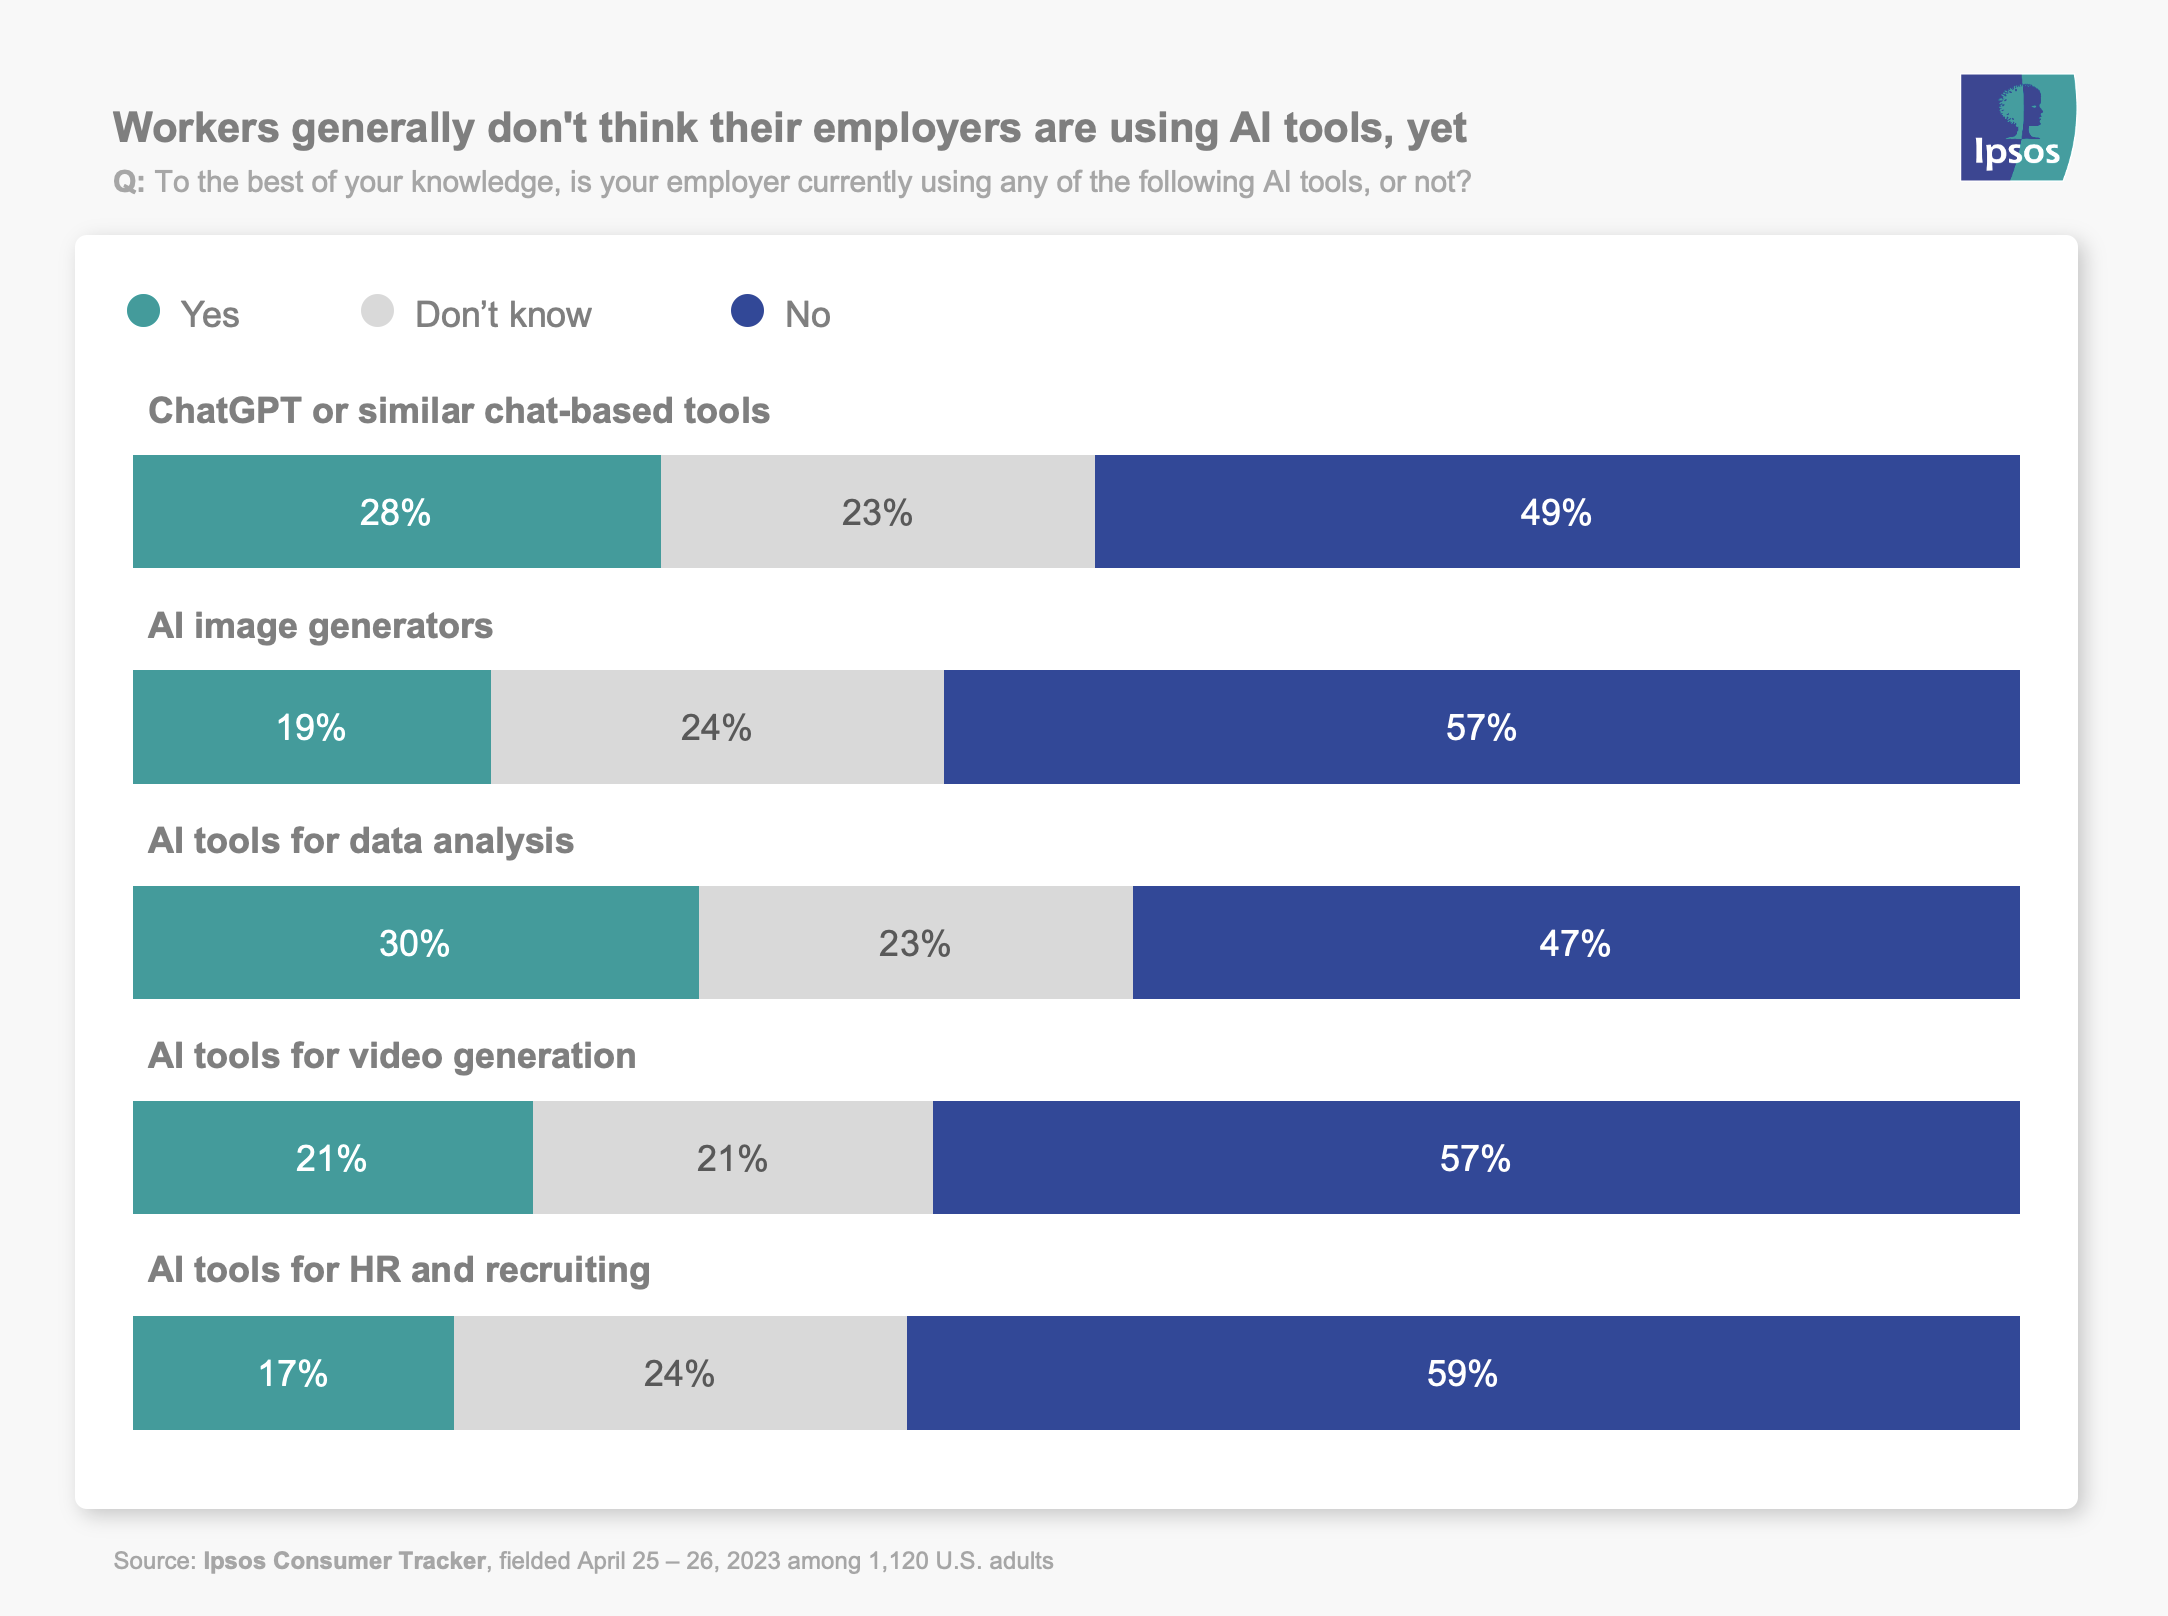 Workers generally don't think their employers are using AI tools, yet